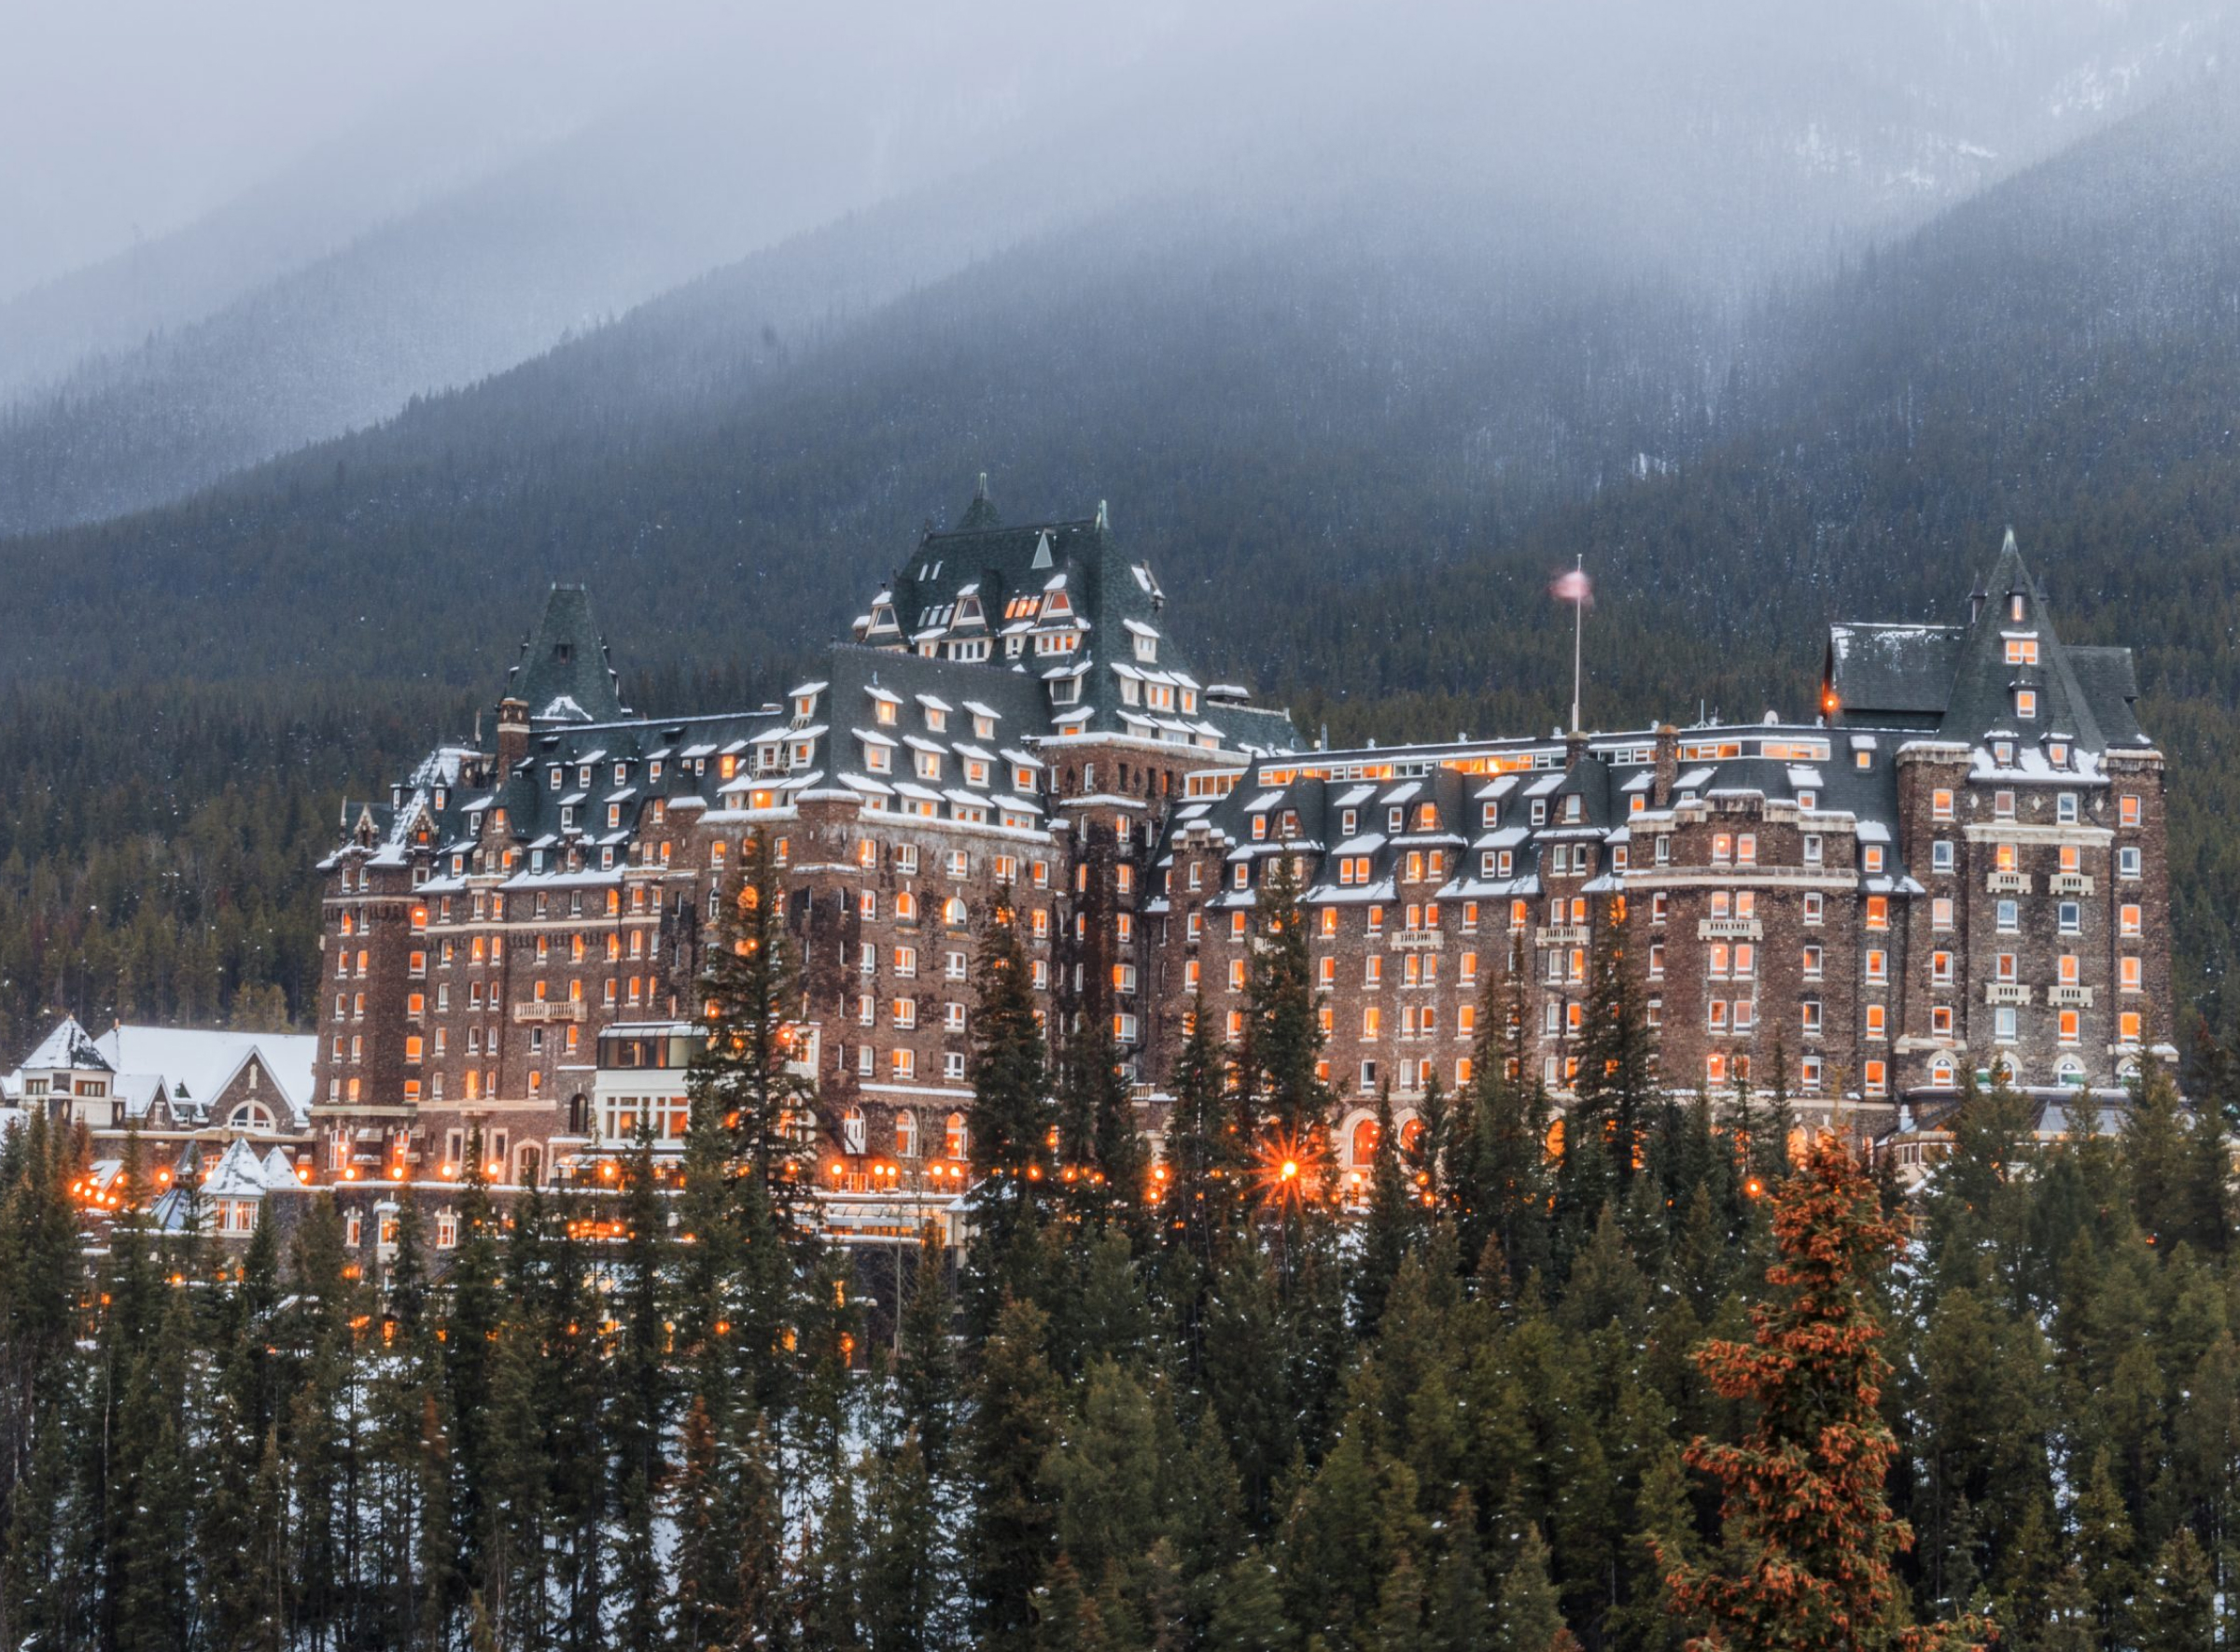 Fairmont Banff Springs Hotel Wins Canada’s Top Honor at World Travel Awards